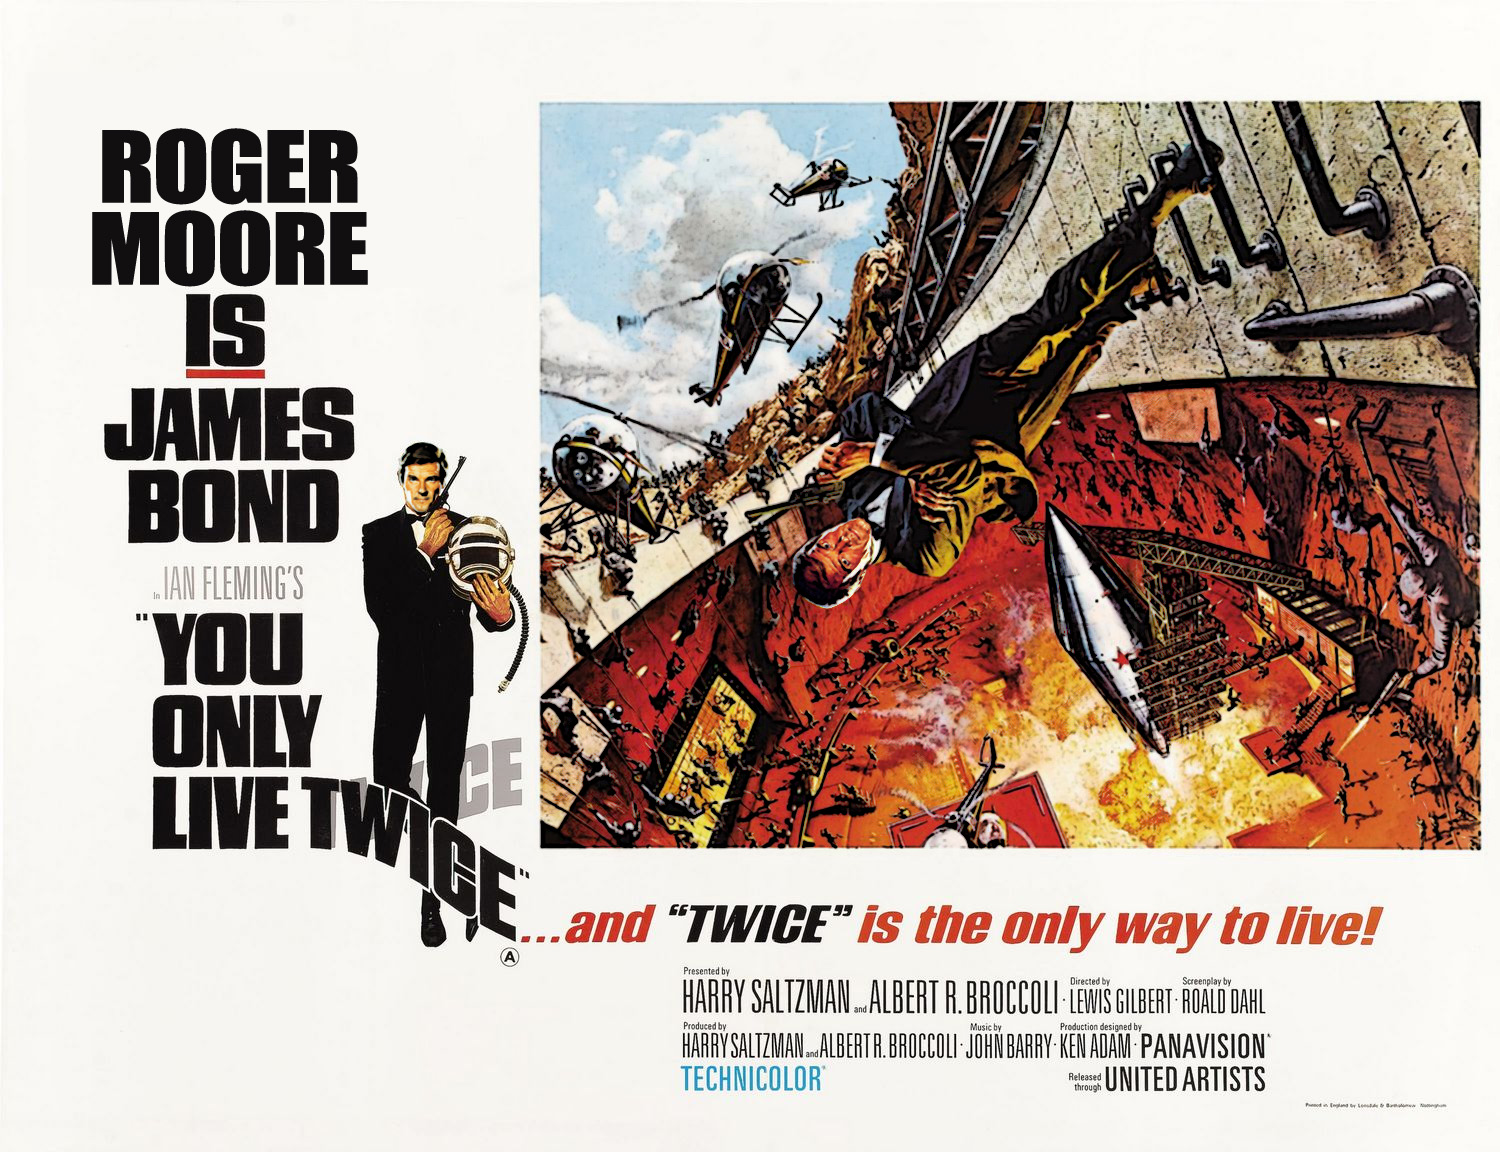 roger_moore_in_you_only_live_twice_poster_by_drandosk-d68v8vr.jpg